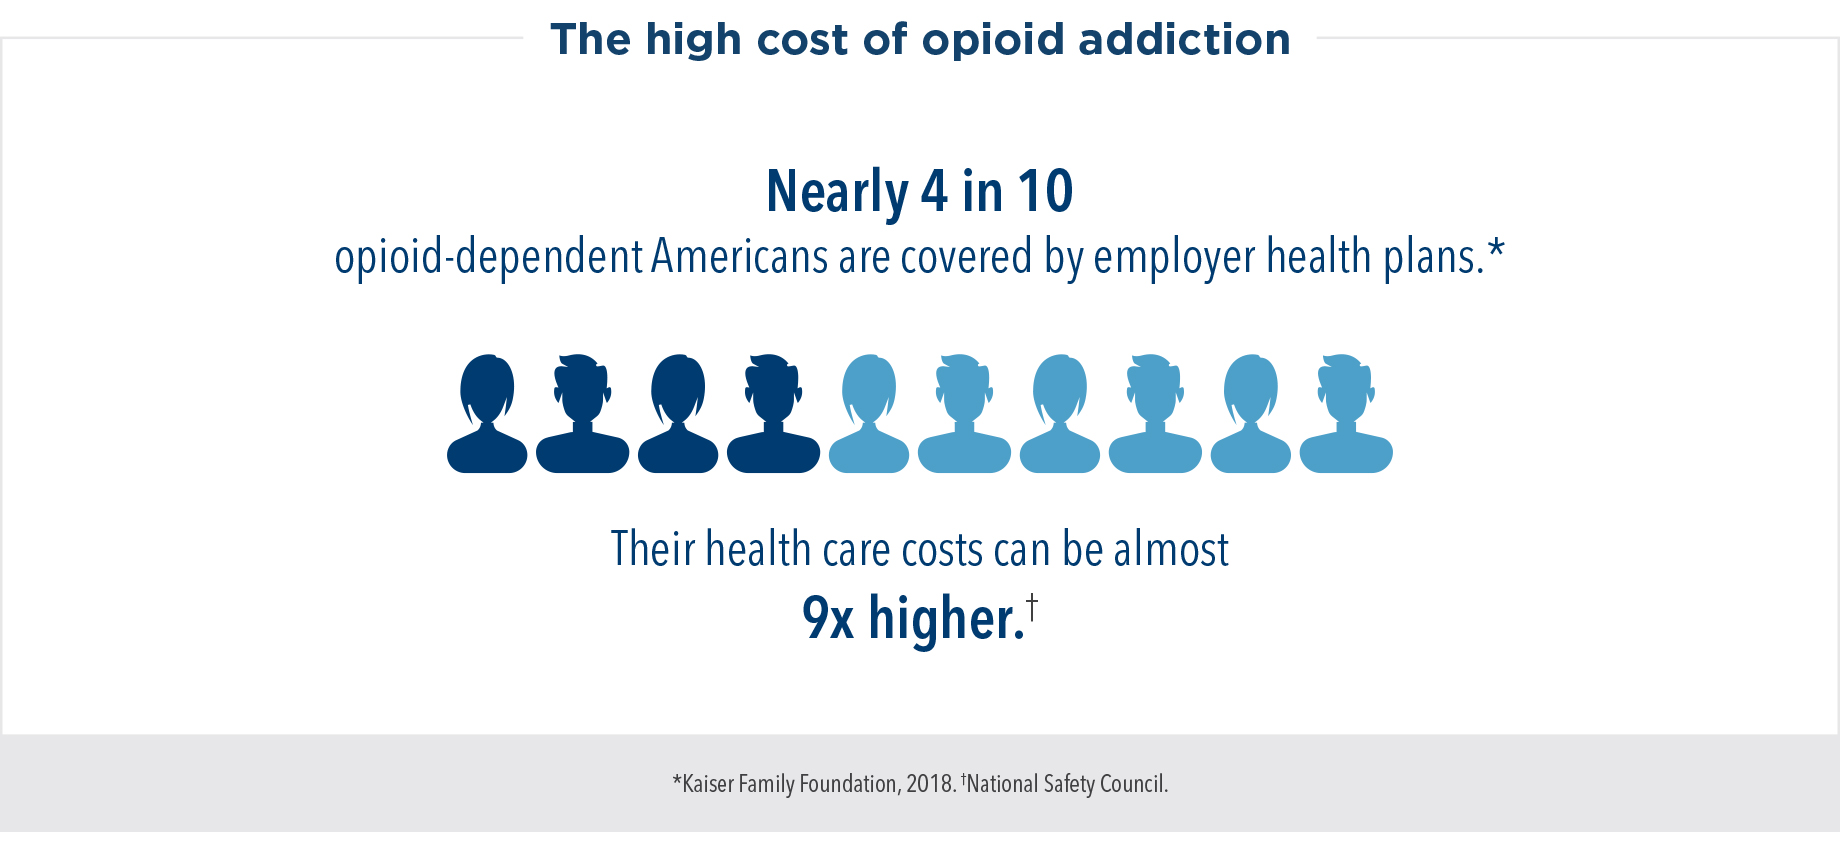 The high cost of opioid addiction: Nearly 4 in 10 opioid-dependent Americans are covered by employer health plans. Their health care costs cam be almost 9 times higher.